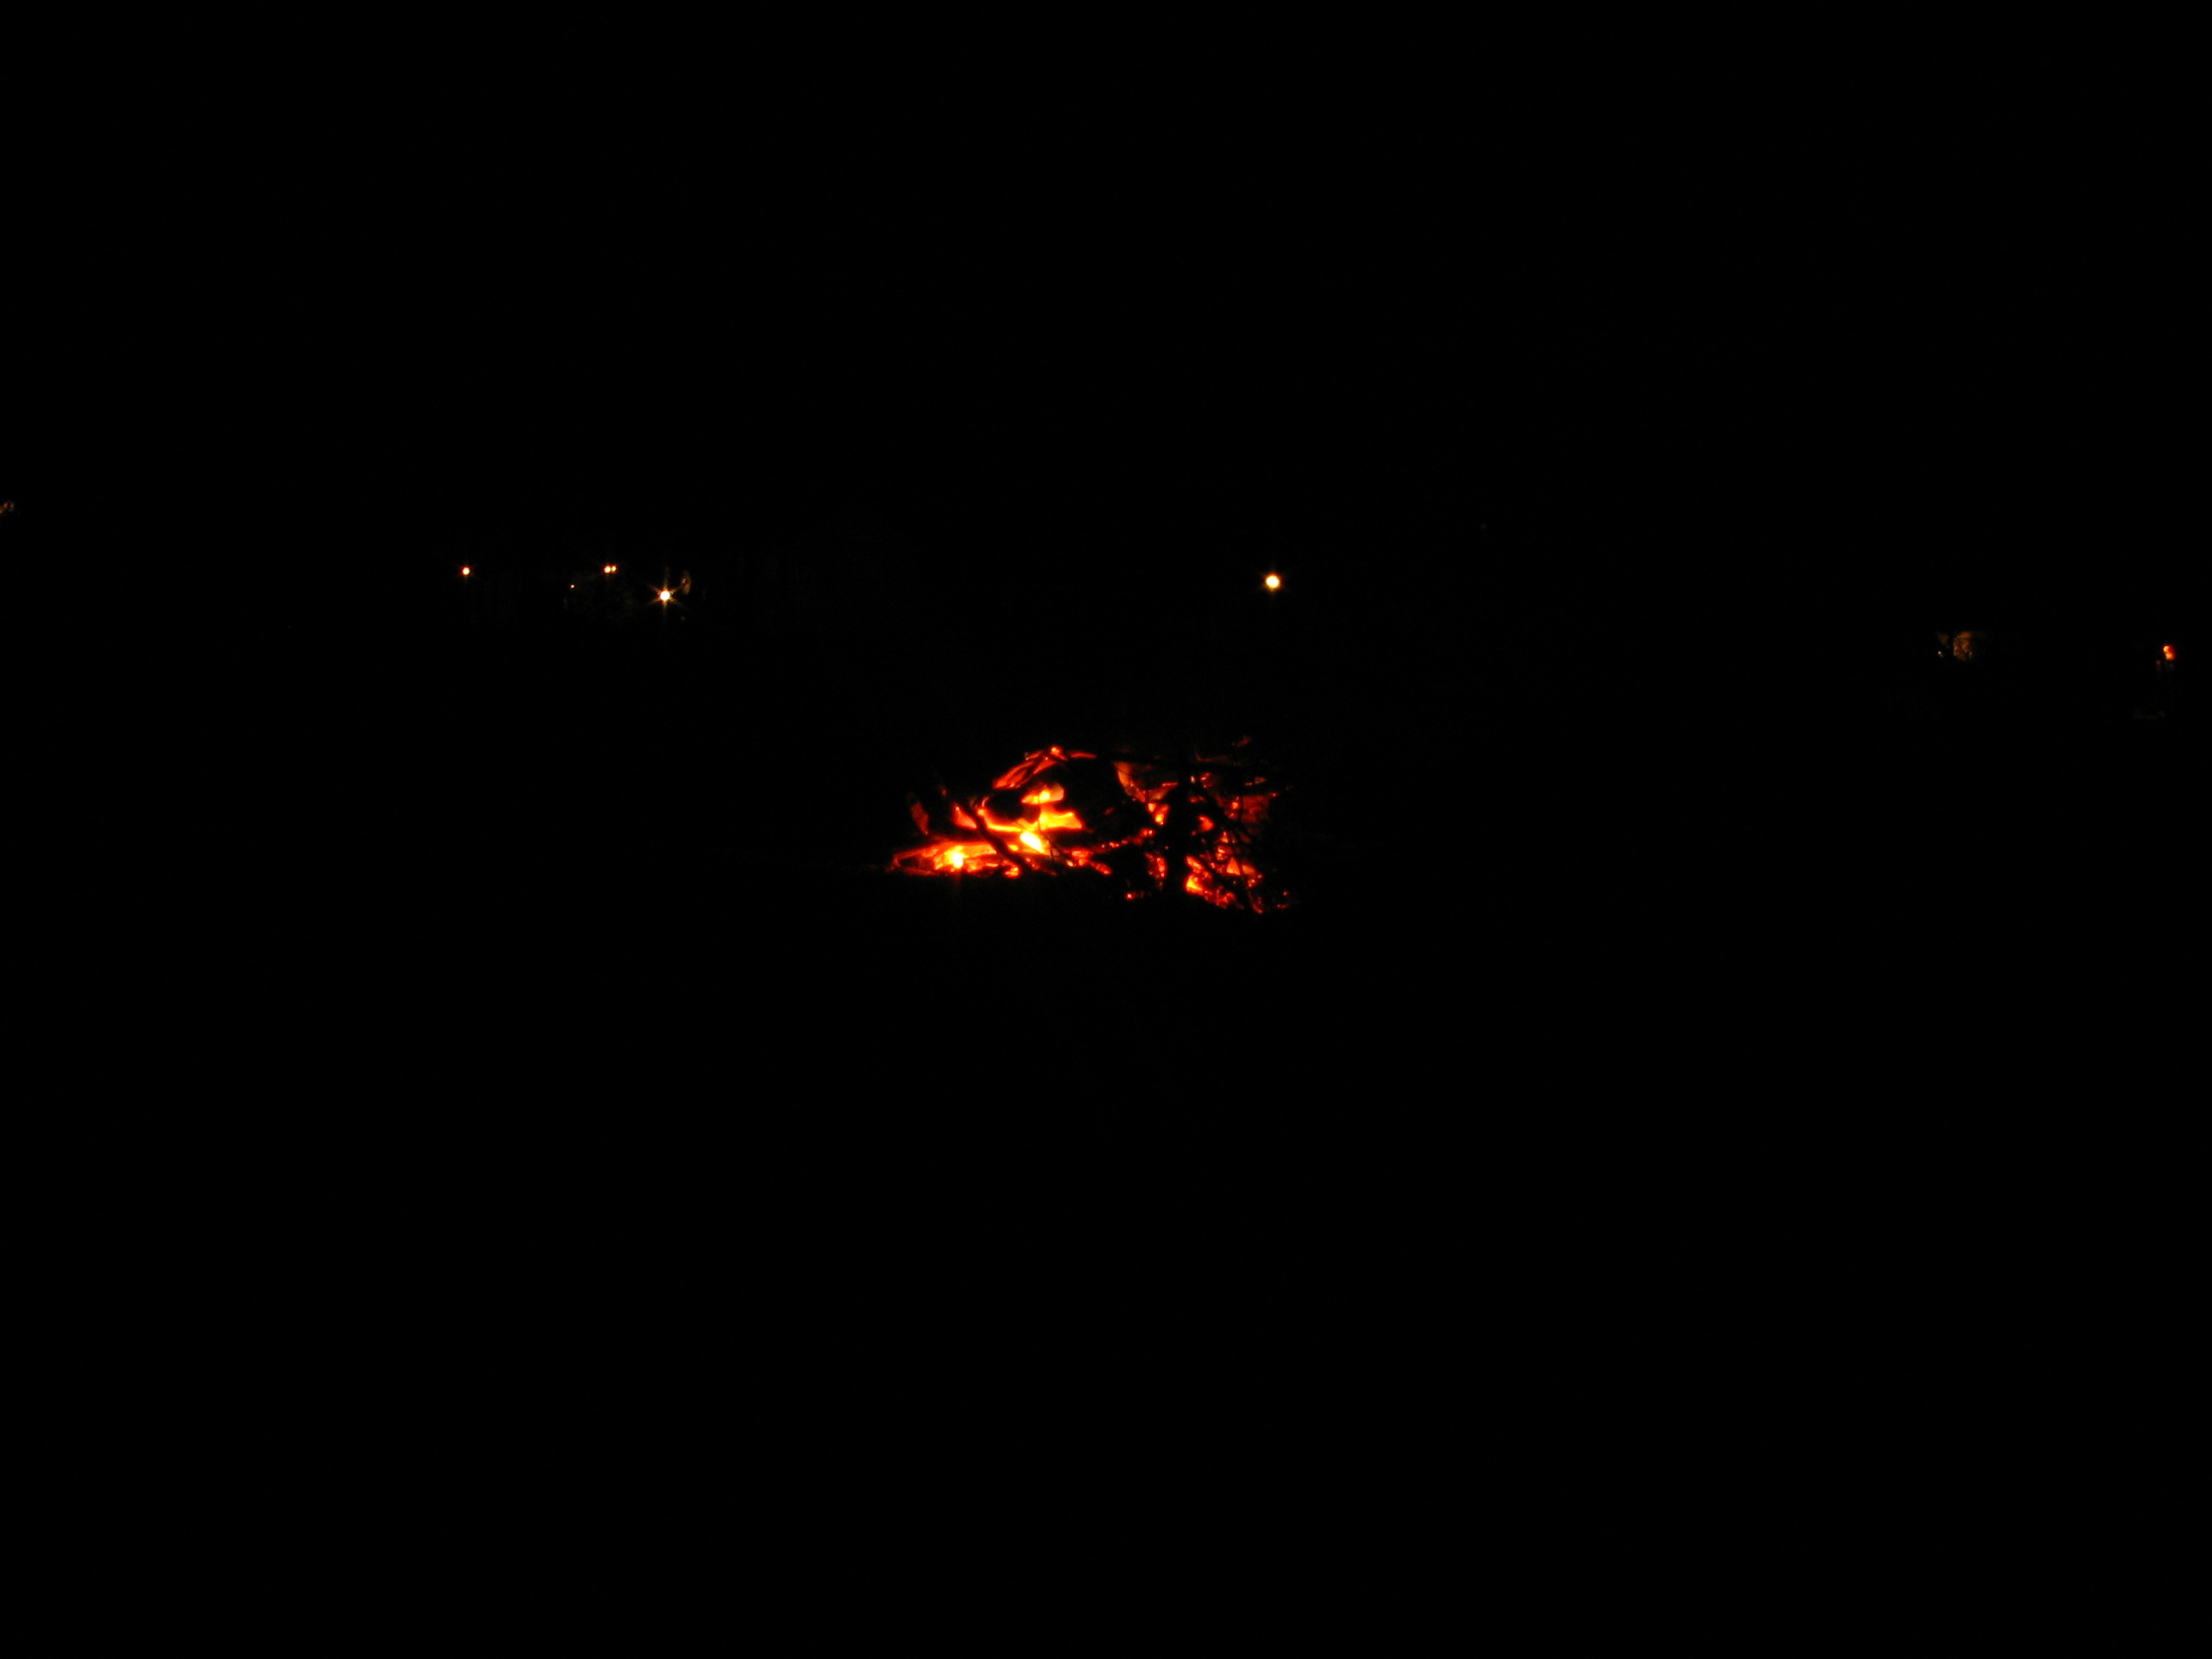 The bond fire that burned all night in my front yard